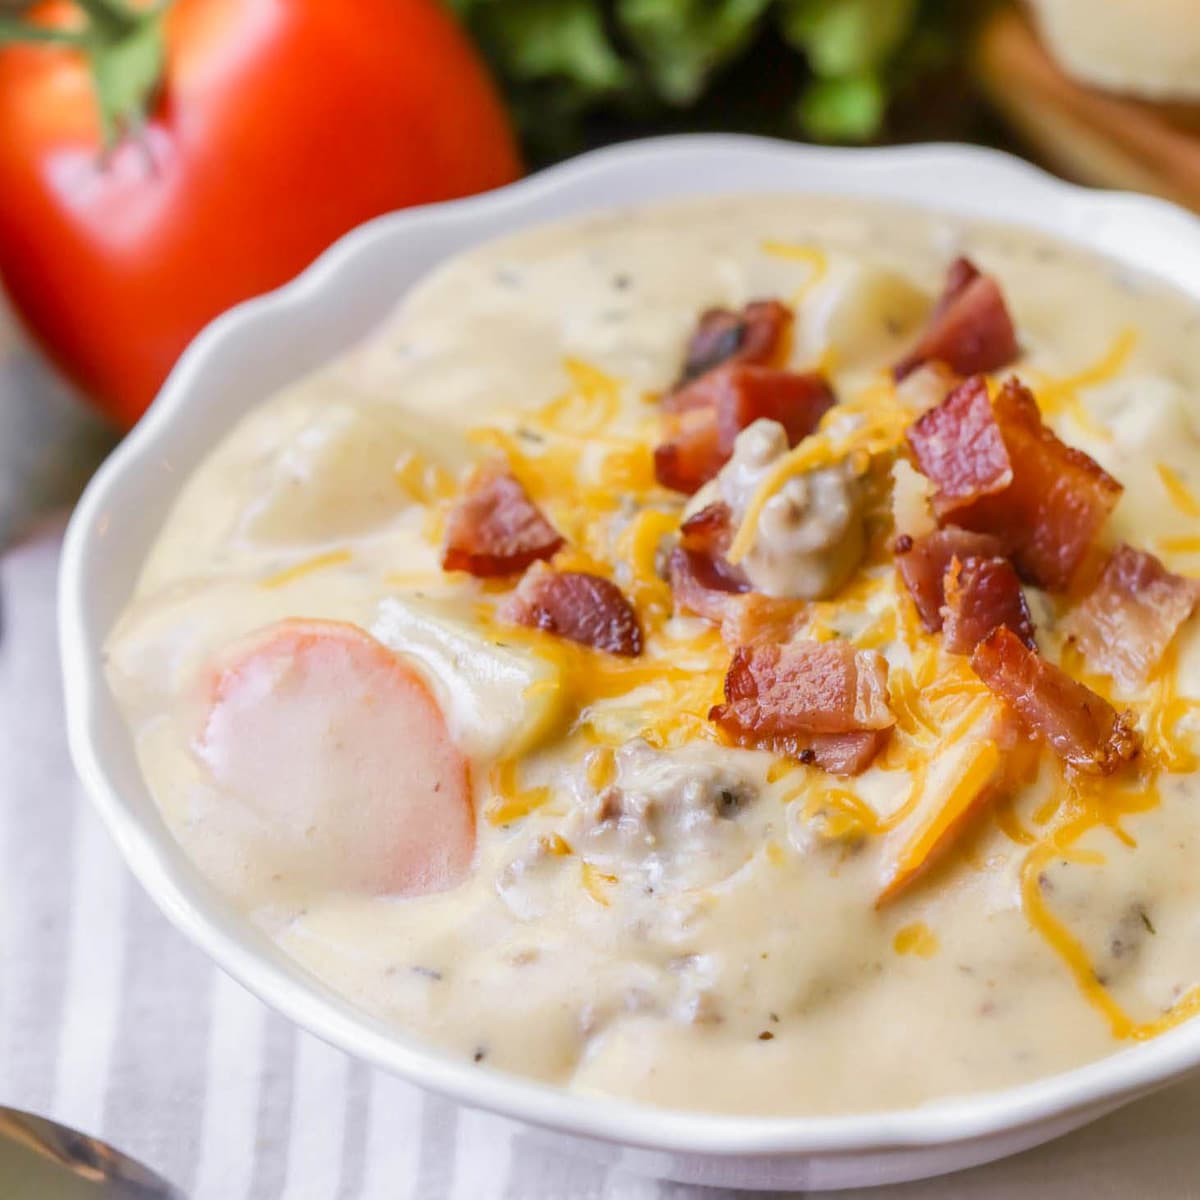 Crockpot soup recipes - Cheese and bacon on a bowl of cheeseburger soup.